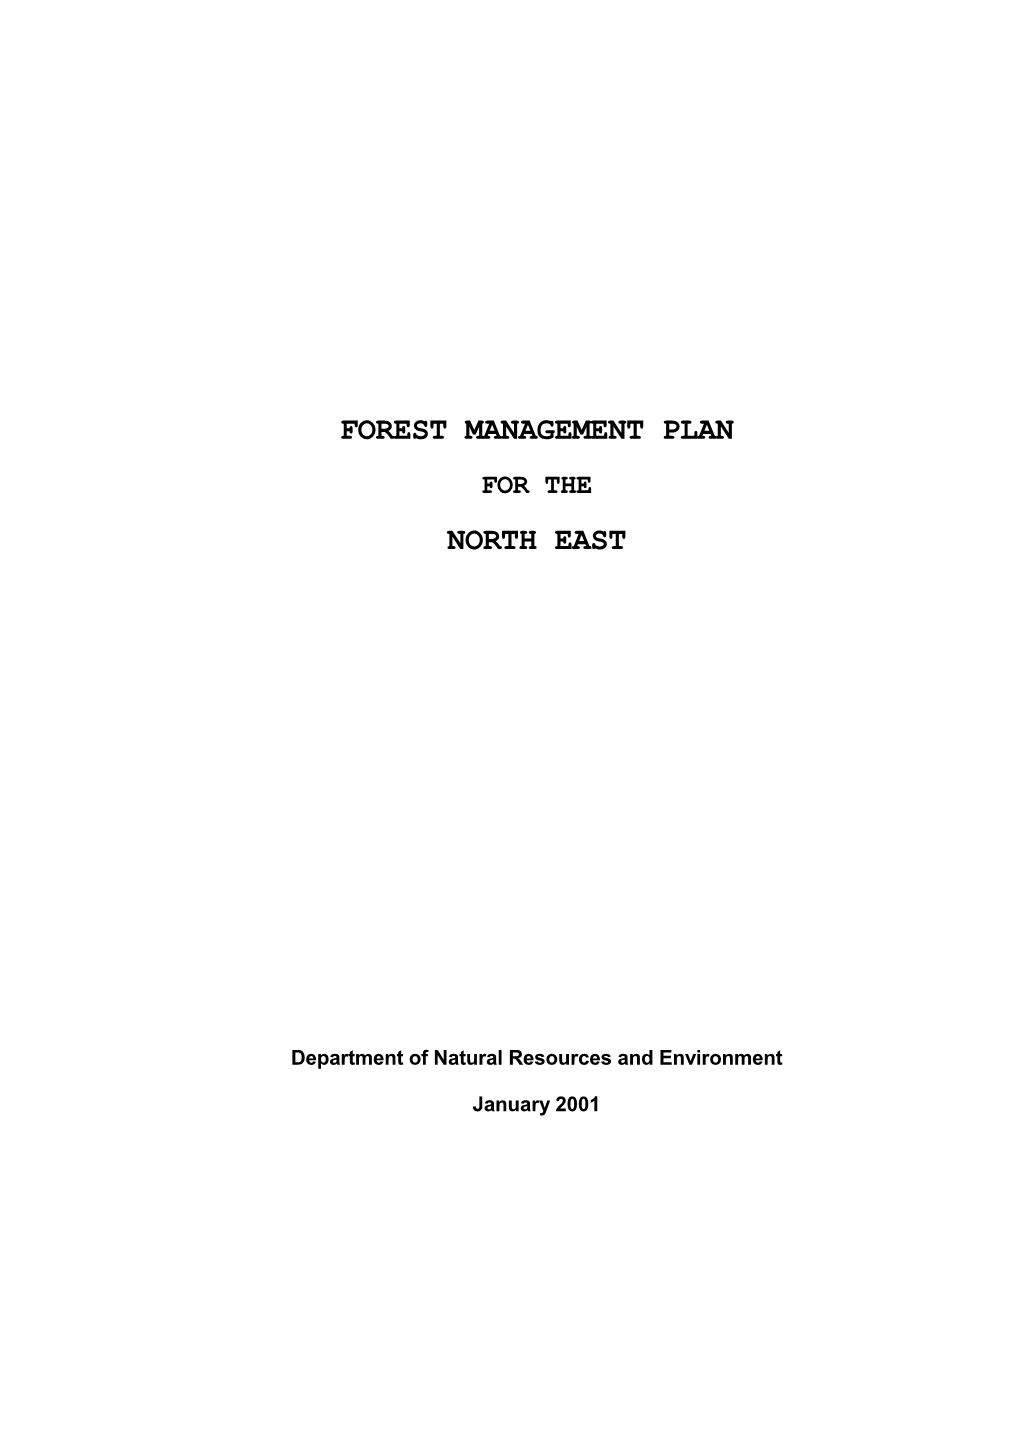 Proposed Forest Management Plan for the North East